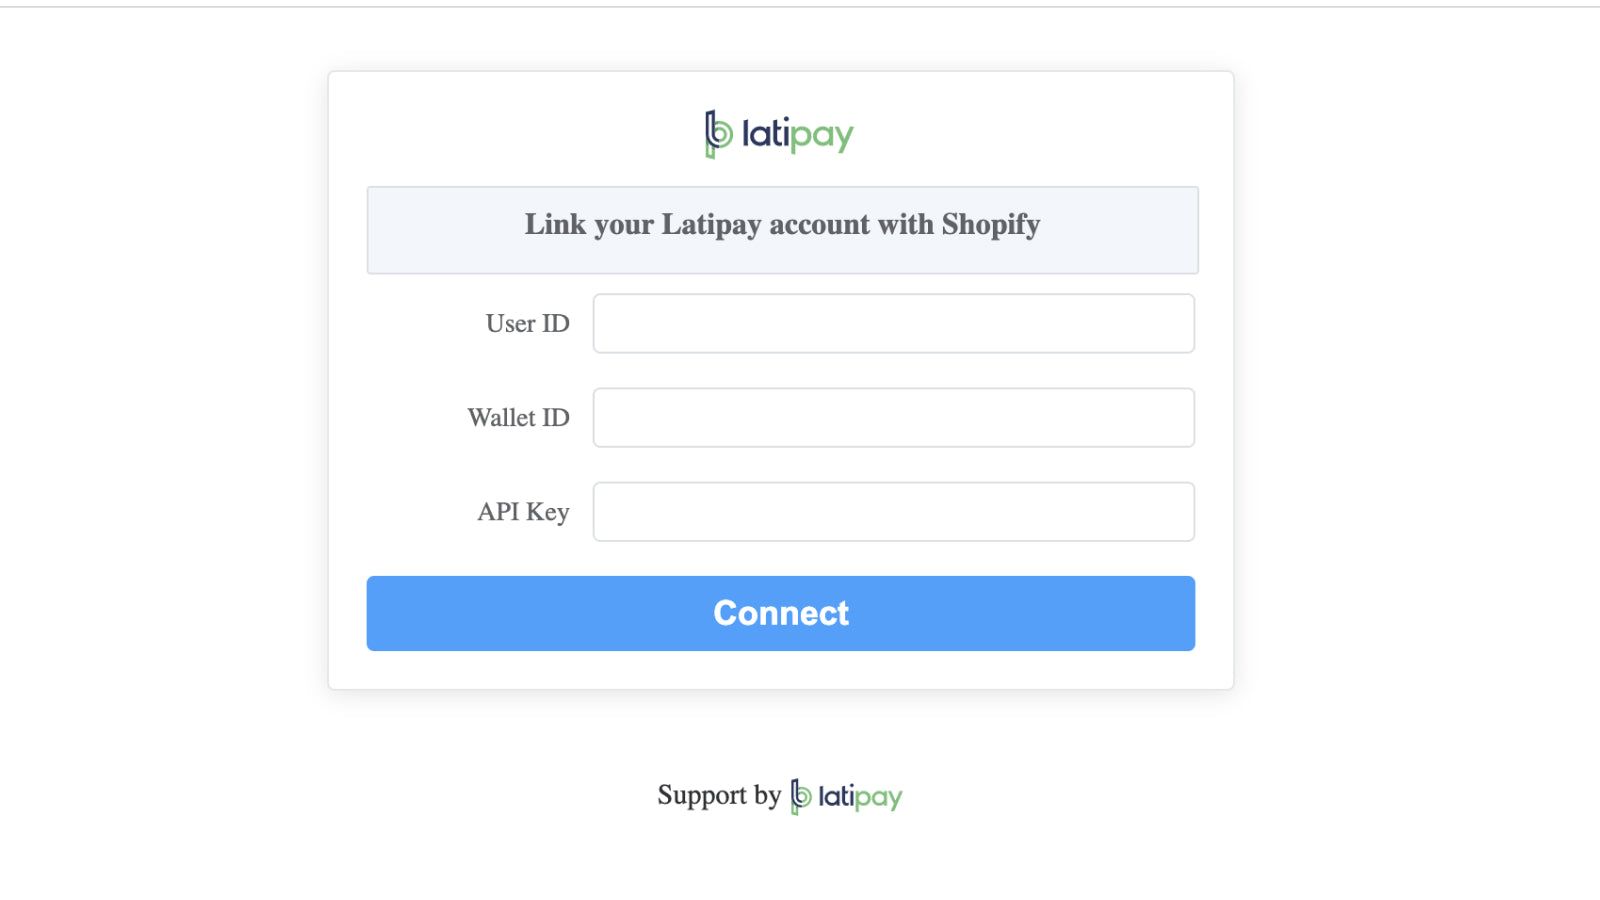 Latipay - Configure and link your Latipay account.